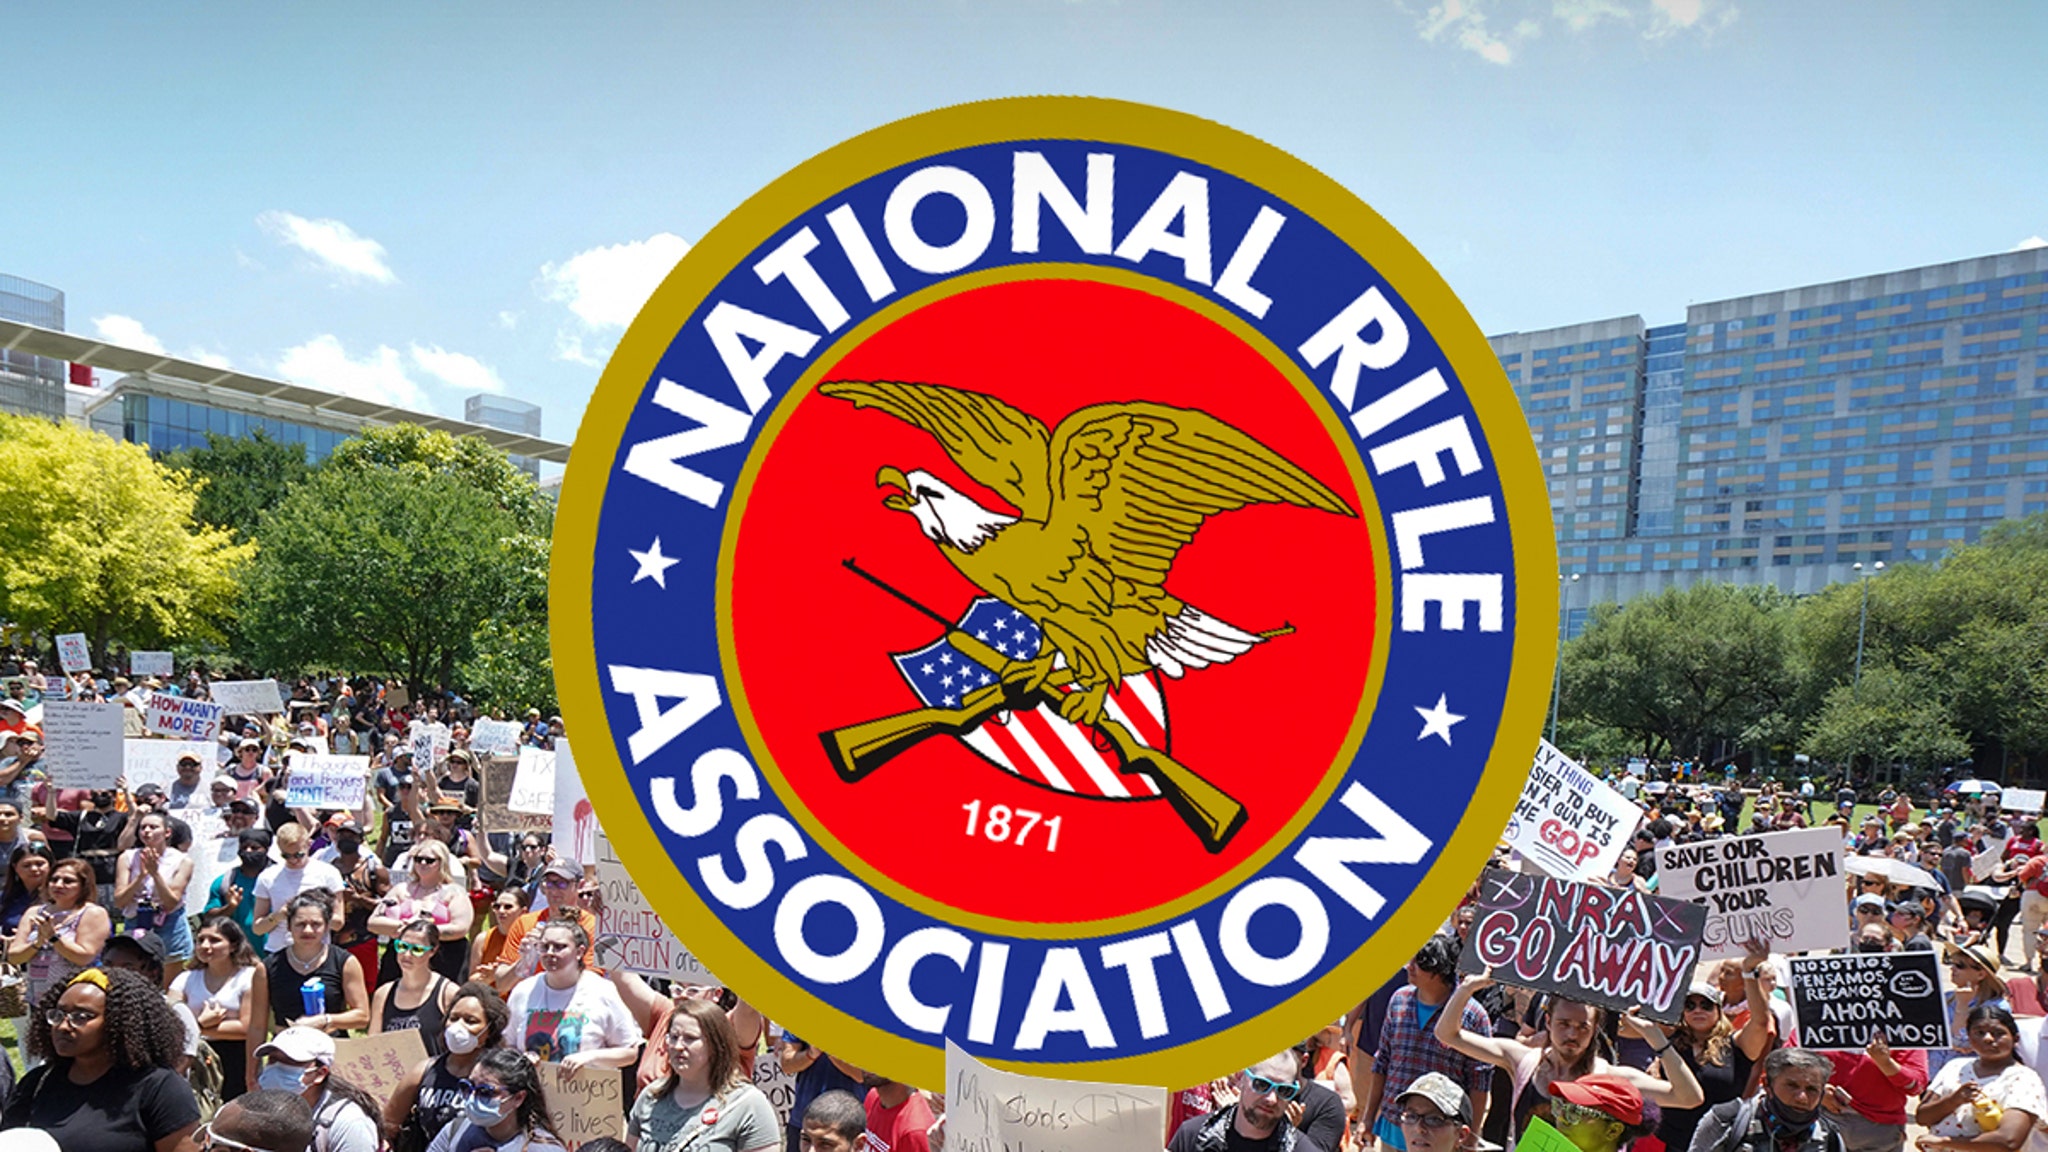 NRA Benefit Concert Canceled After Performers Pull Out Over School